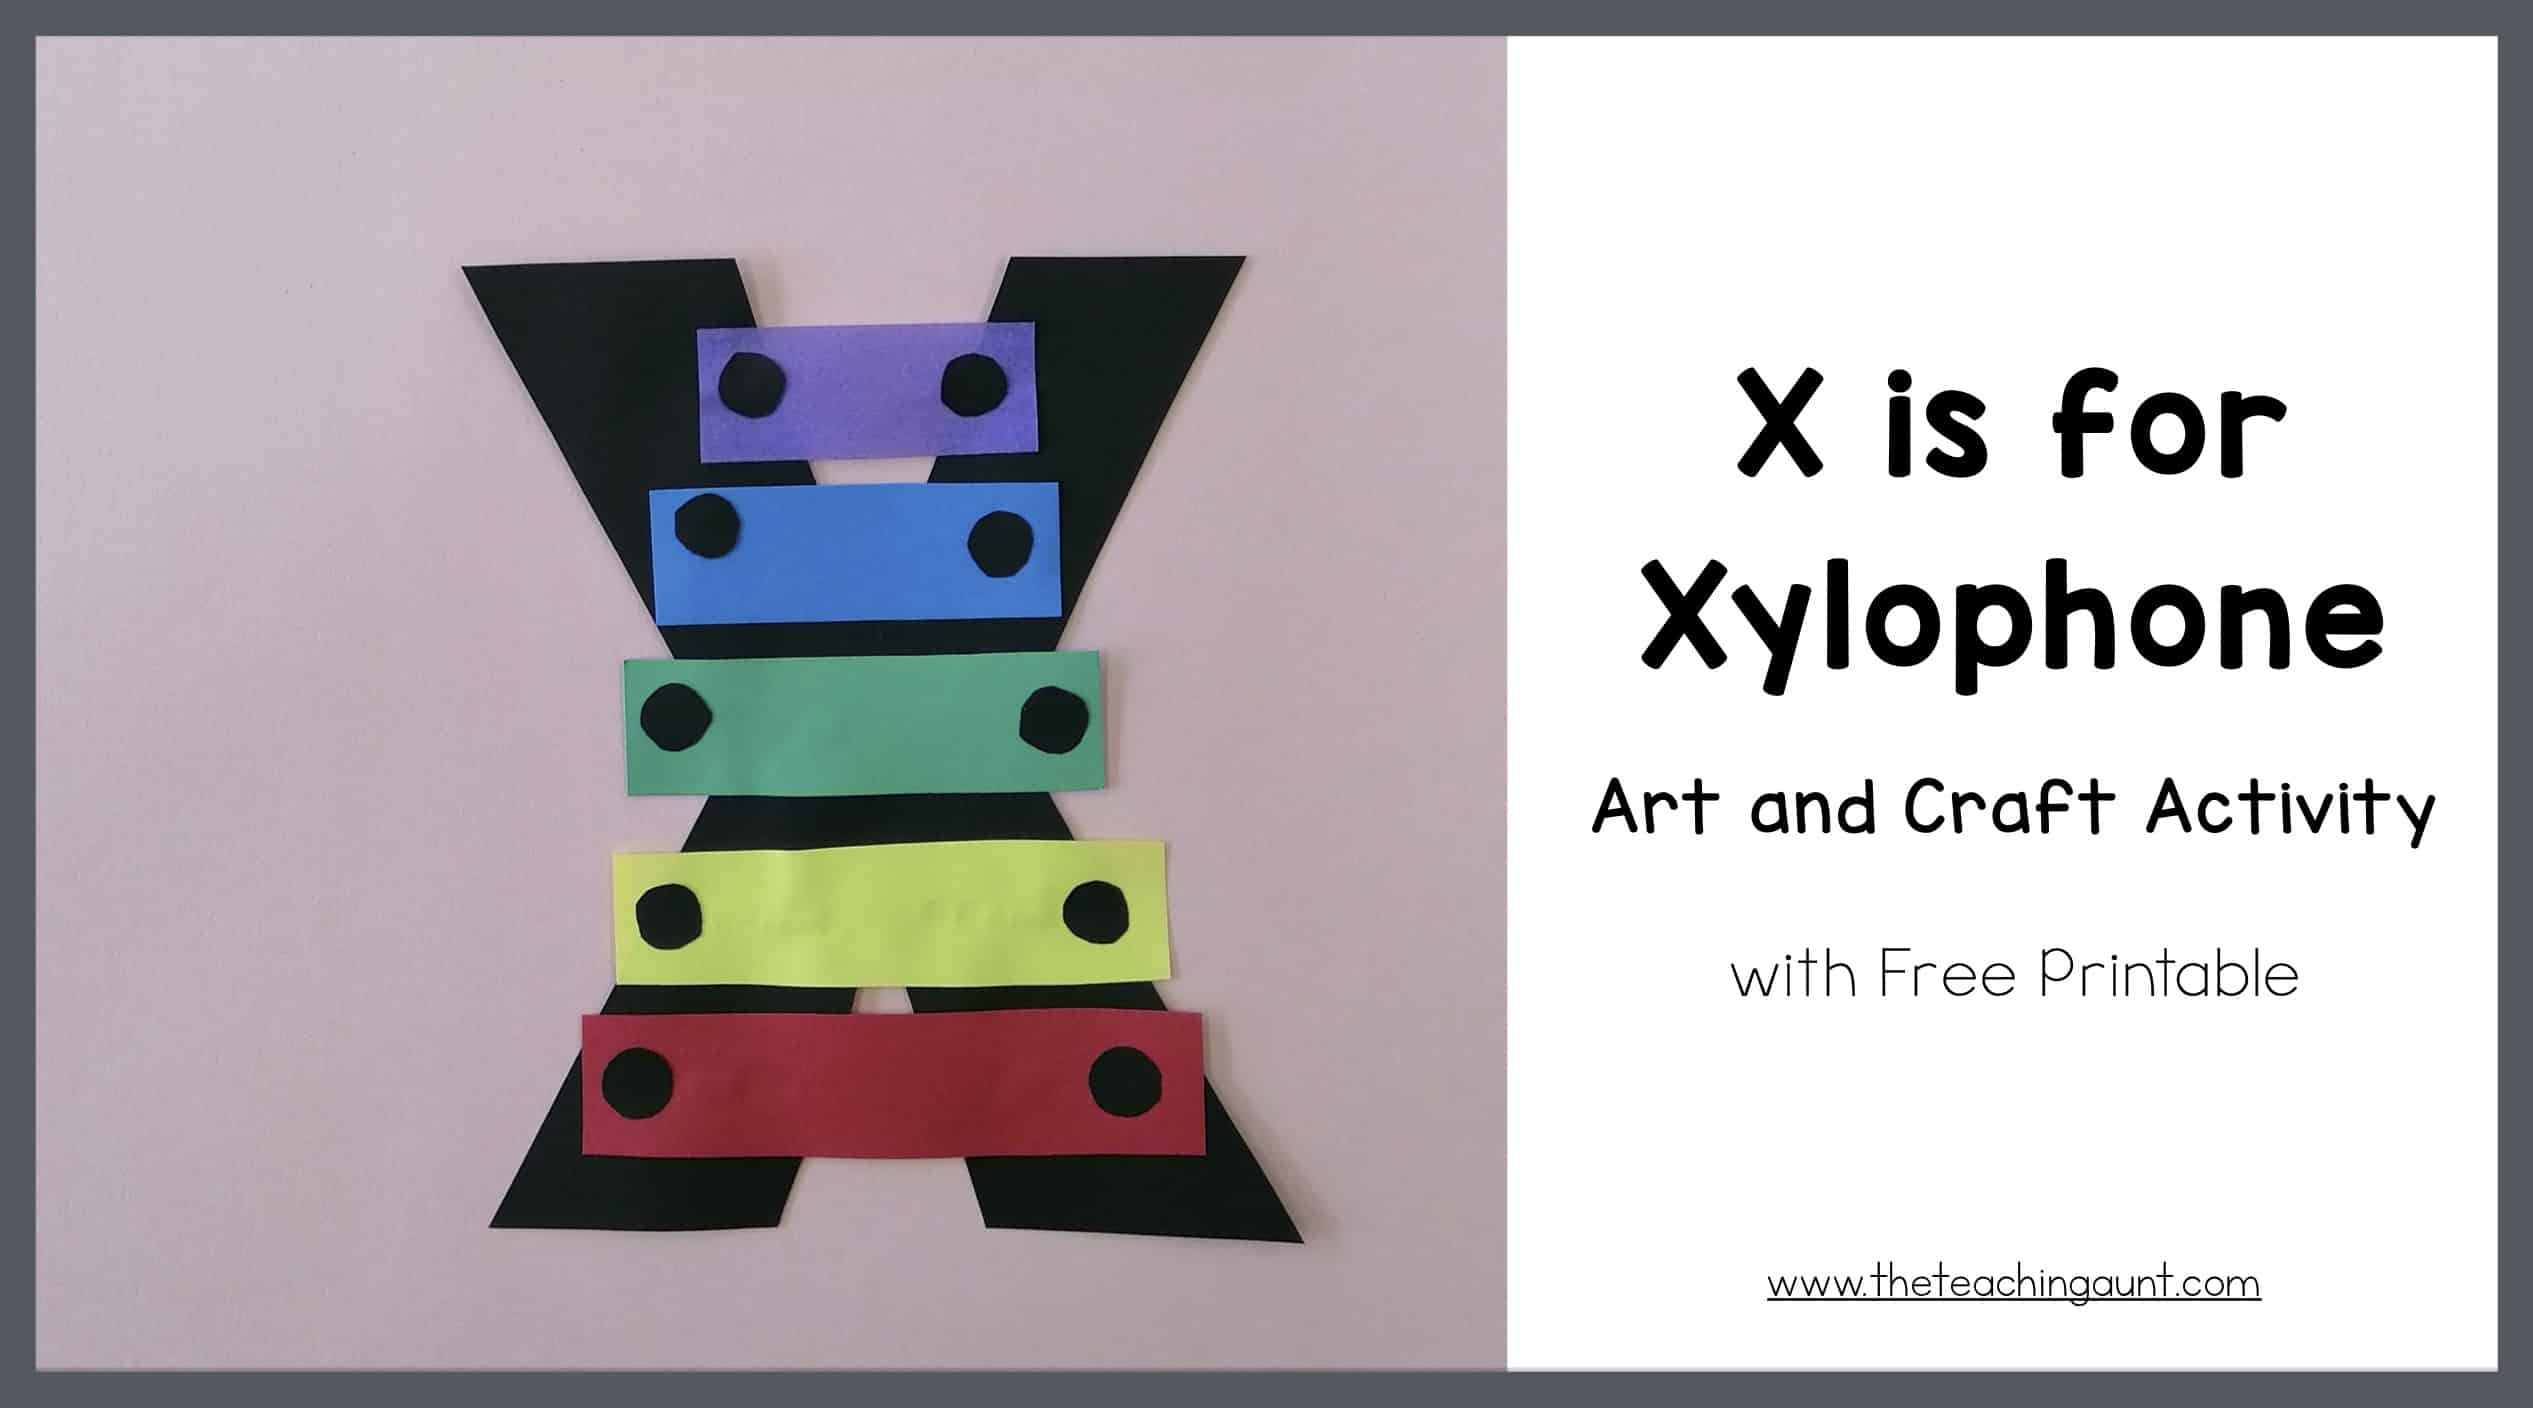 X is for Xylophone Art and Craft